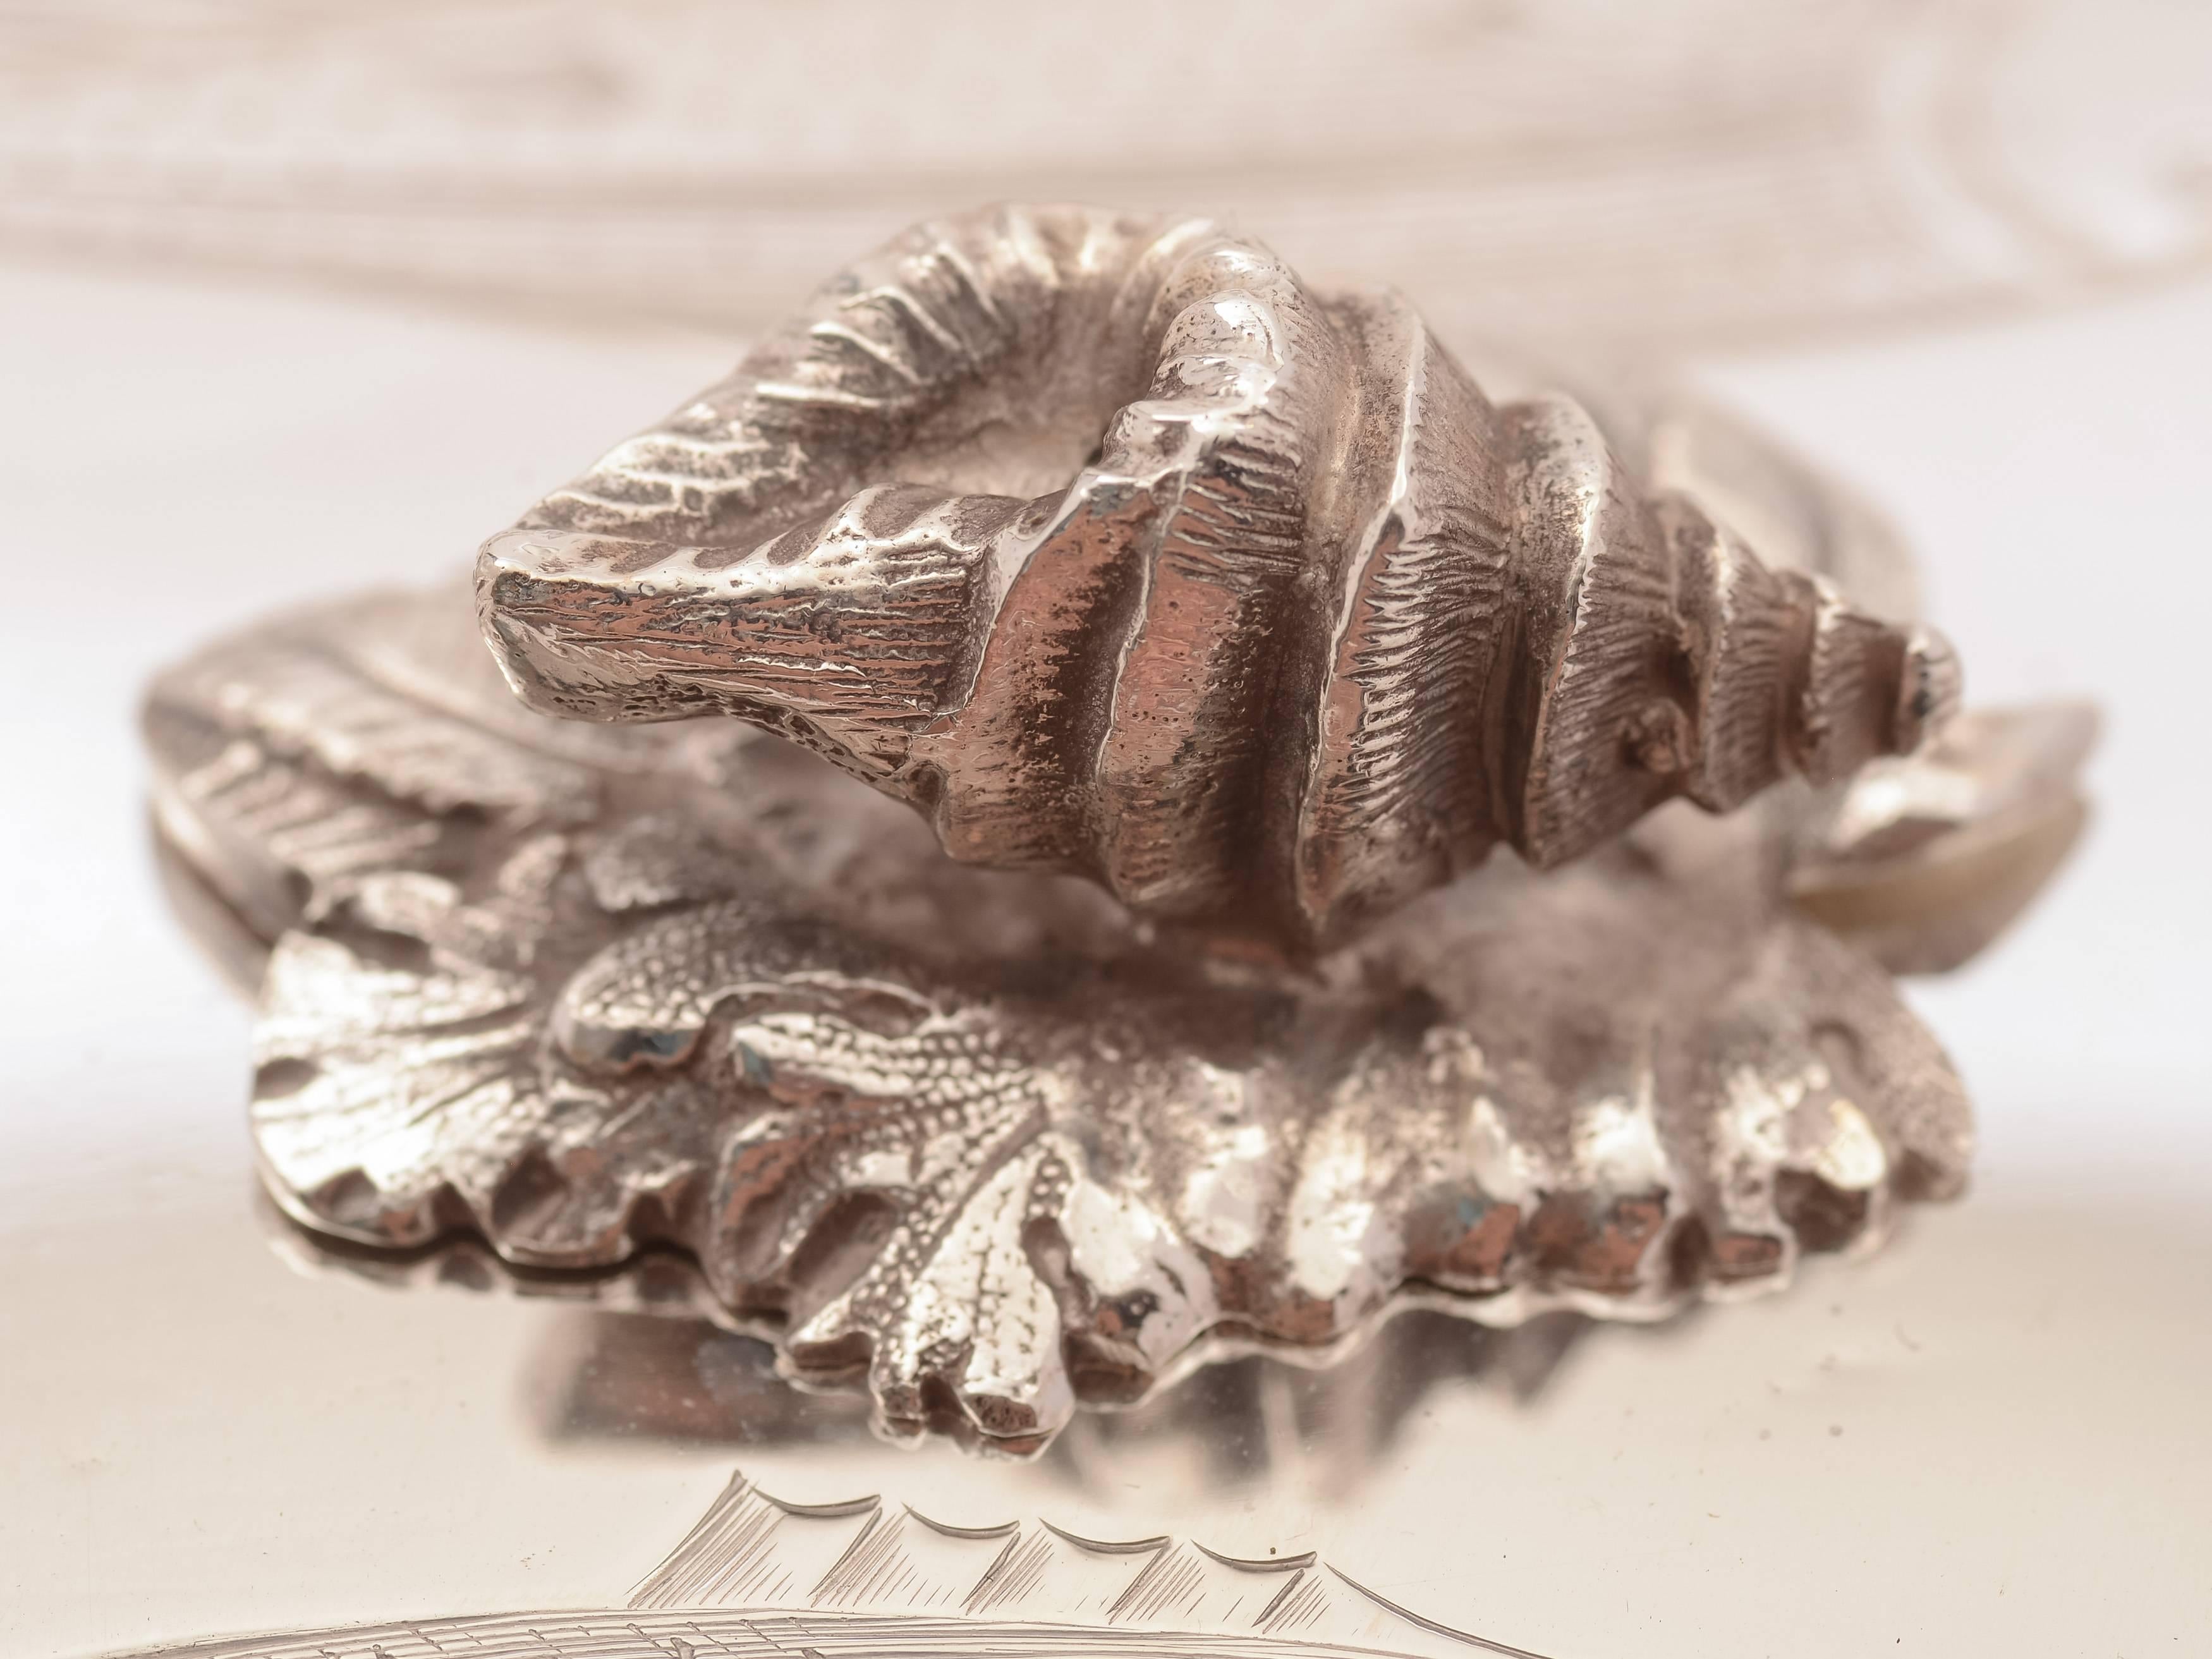 Frosted Victorian Novelty Silver Plated Butter Dish, circa 1880